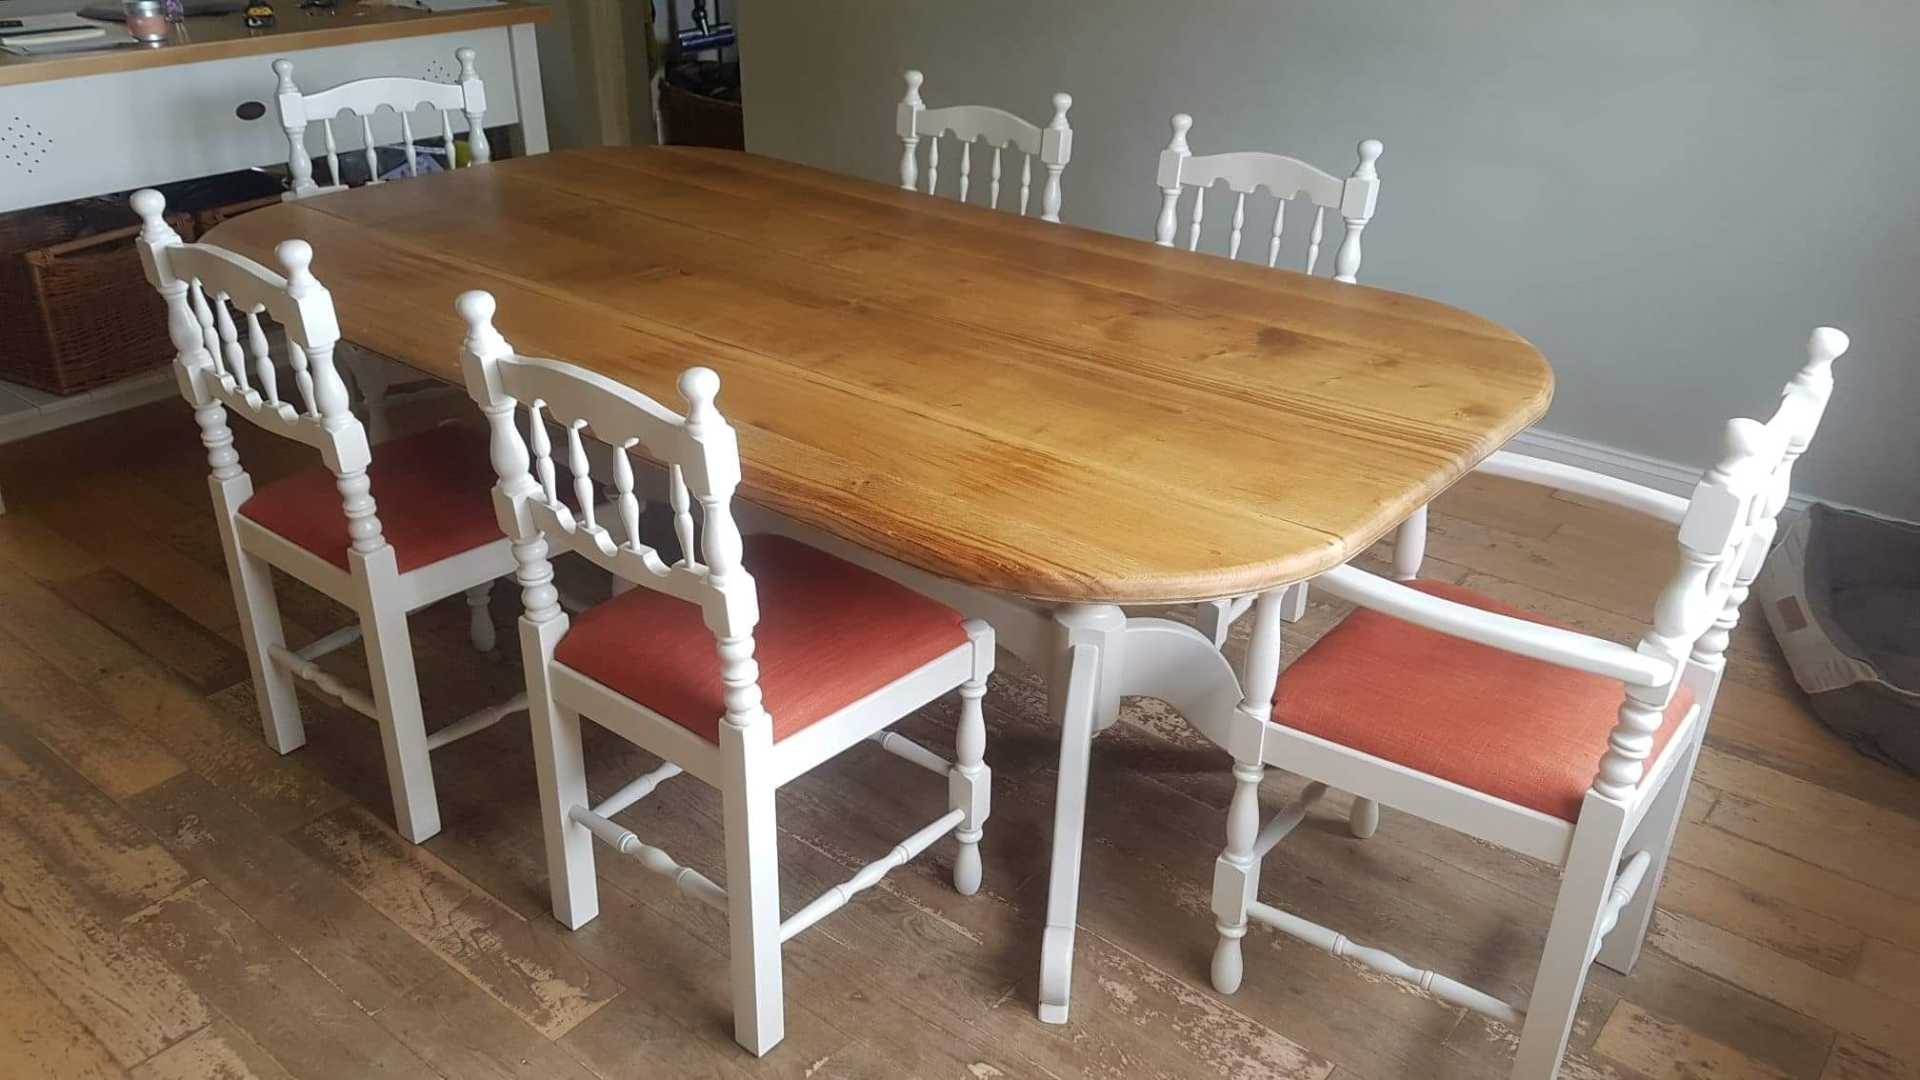 Wooden pine table and chairs / carvers with white legs and red fabric seats